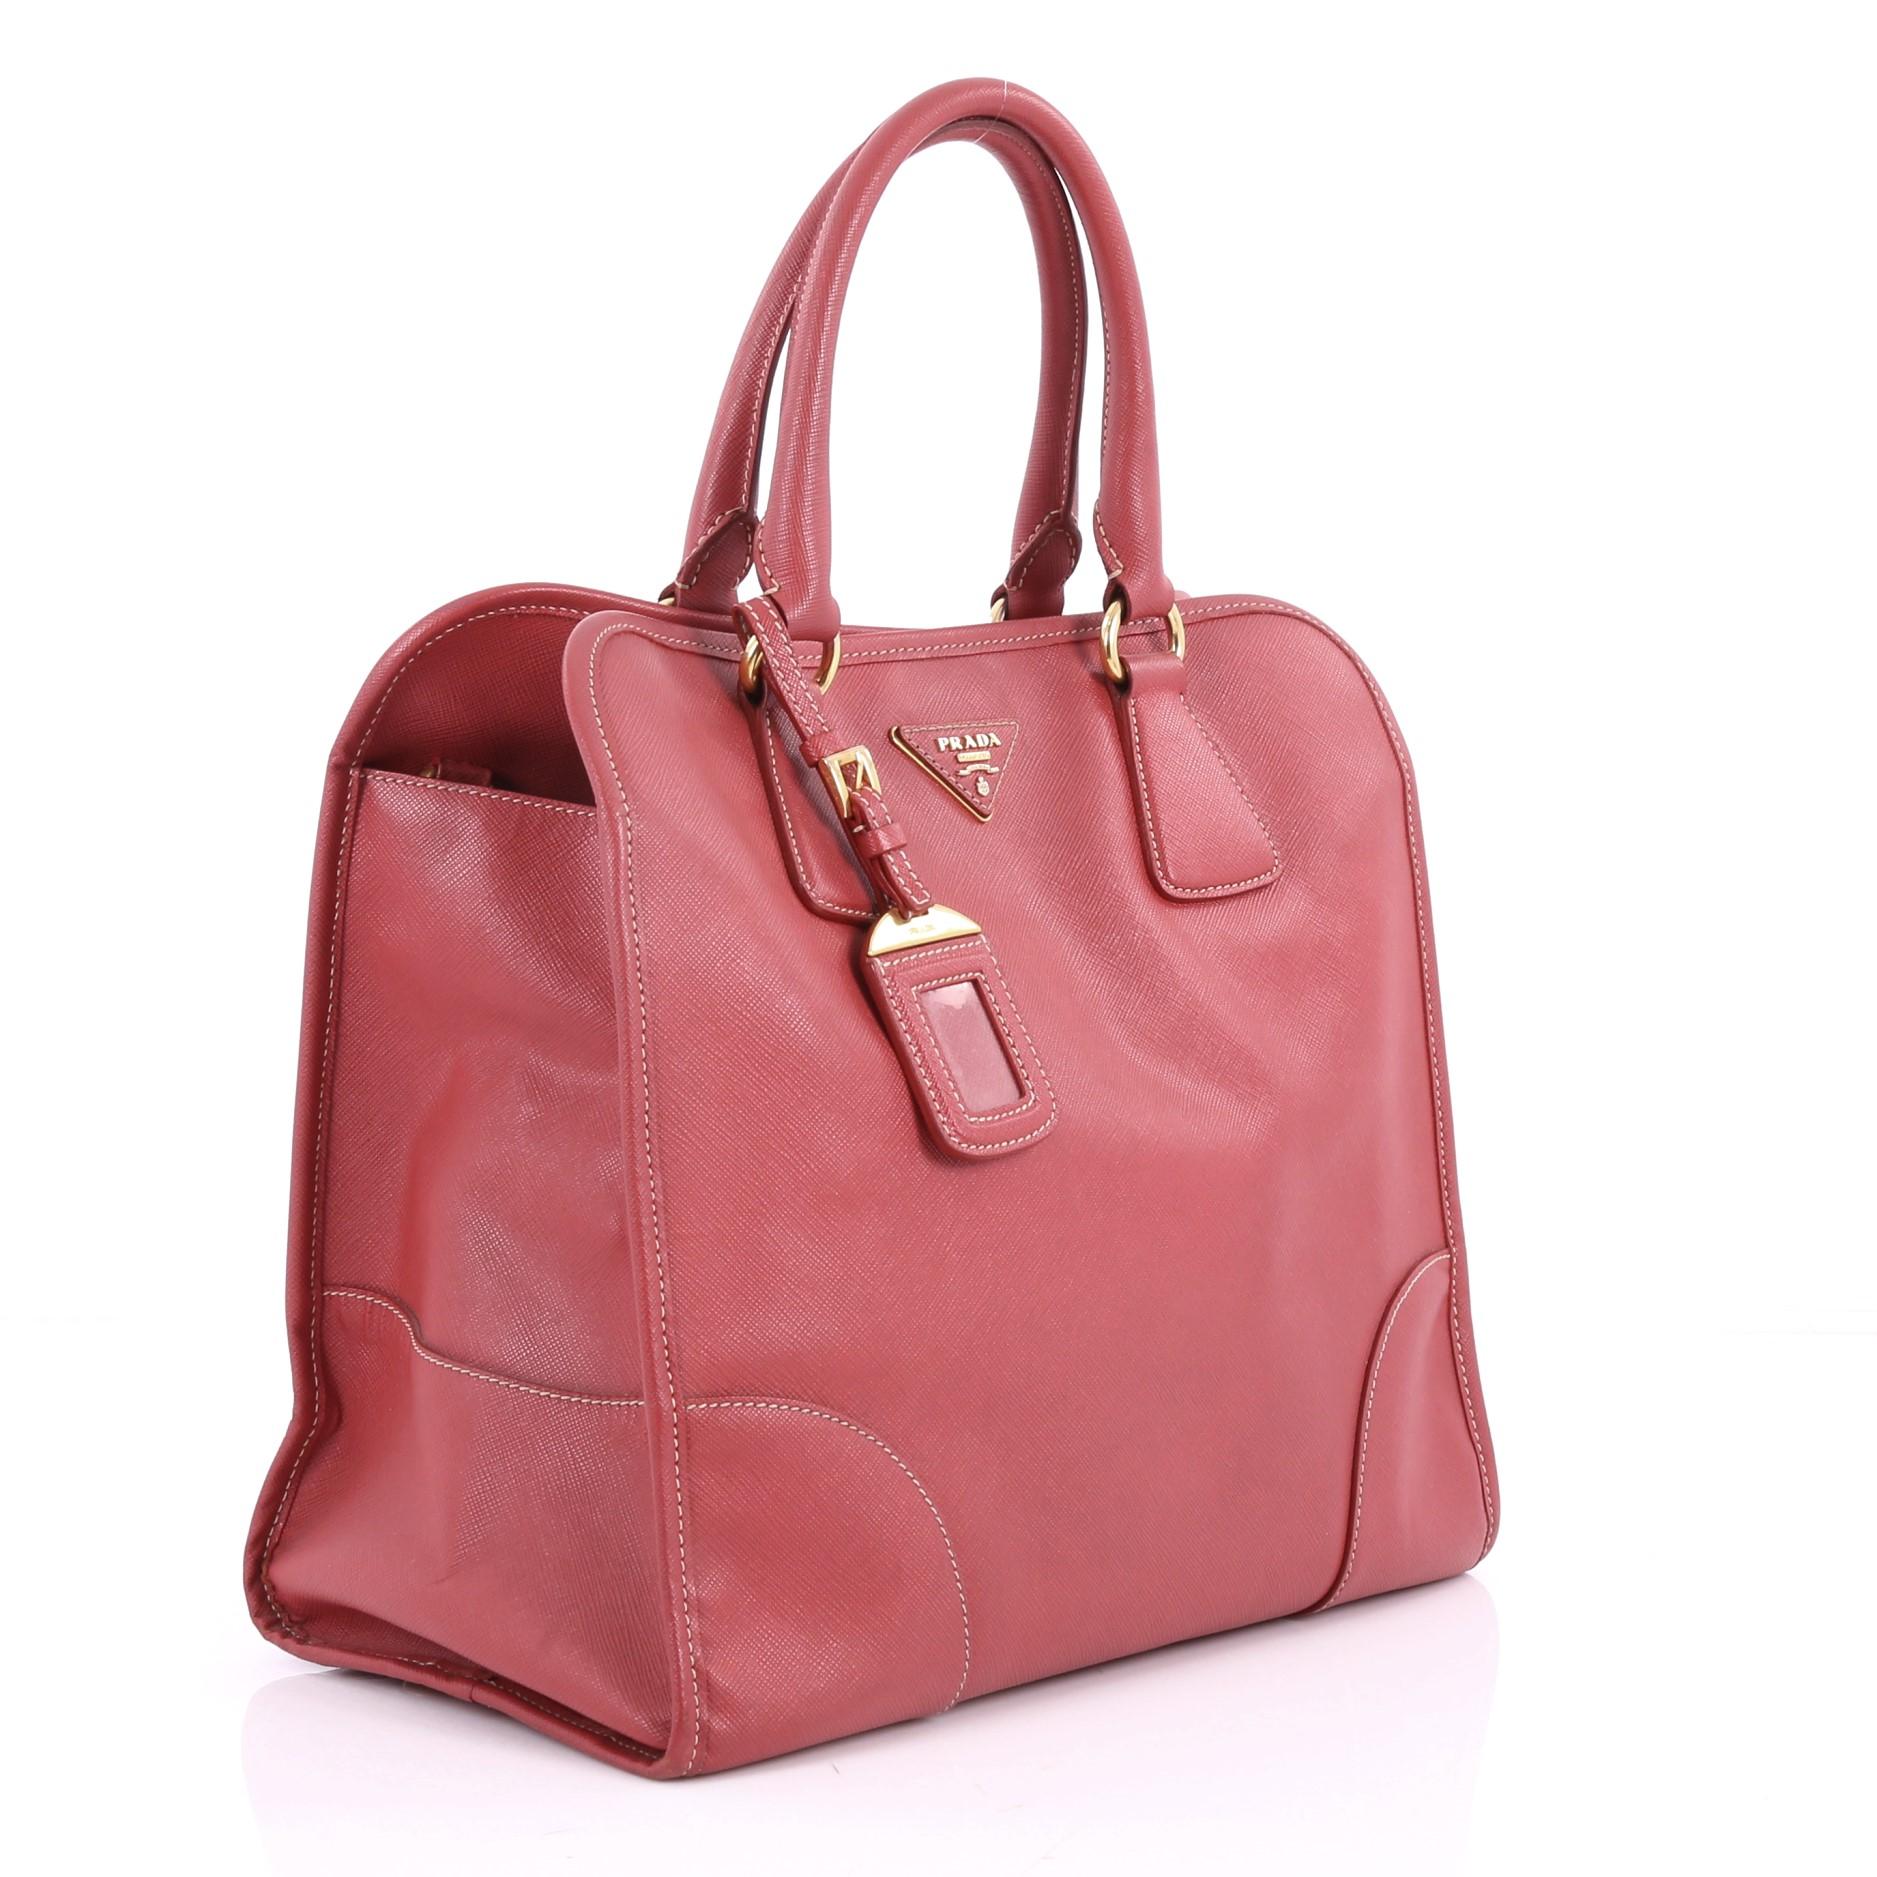 Pink Prada Convertible Shopping Tote Saffiano Leather Large